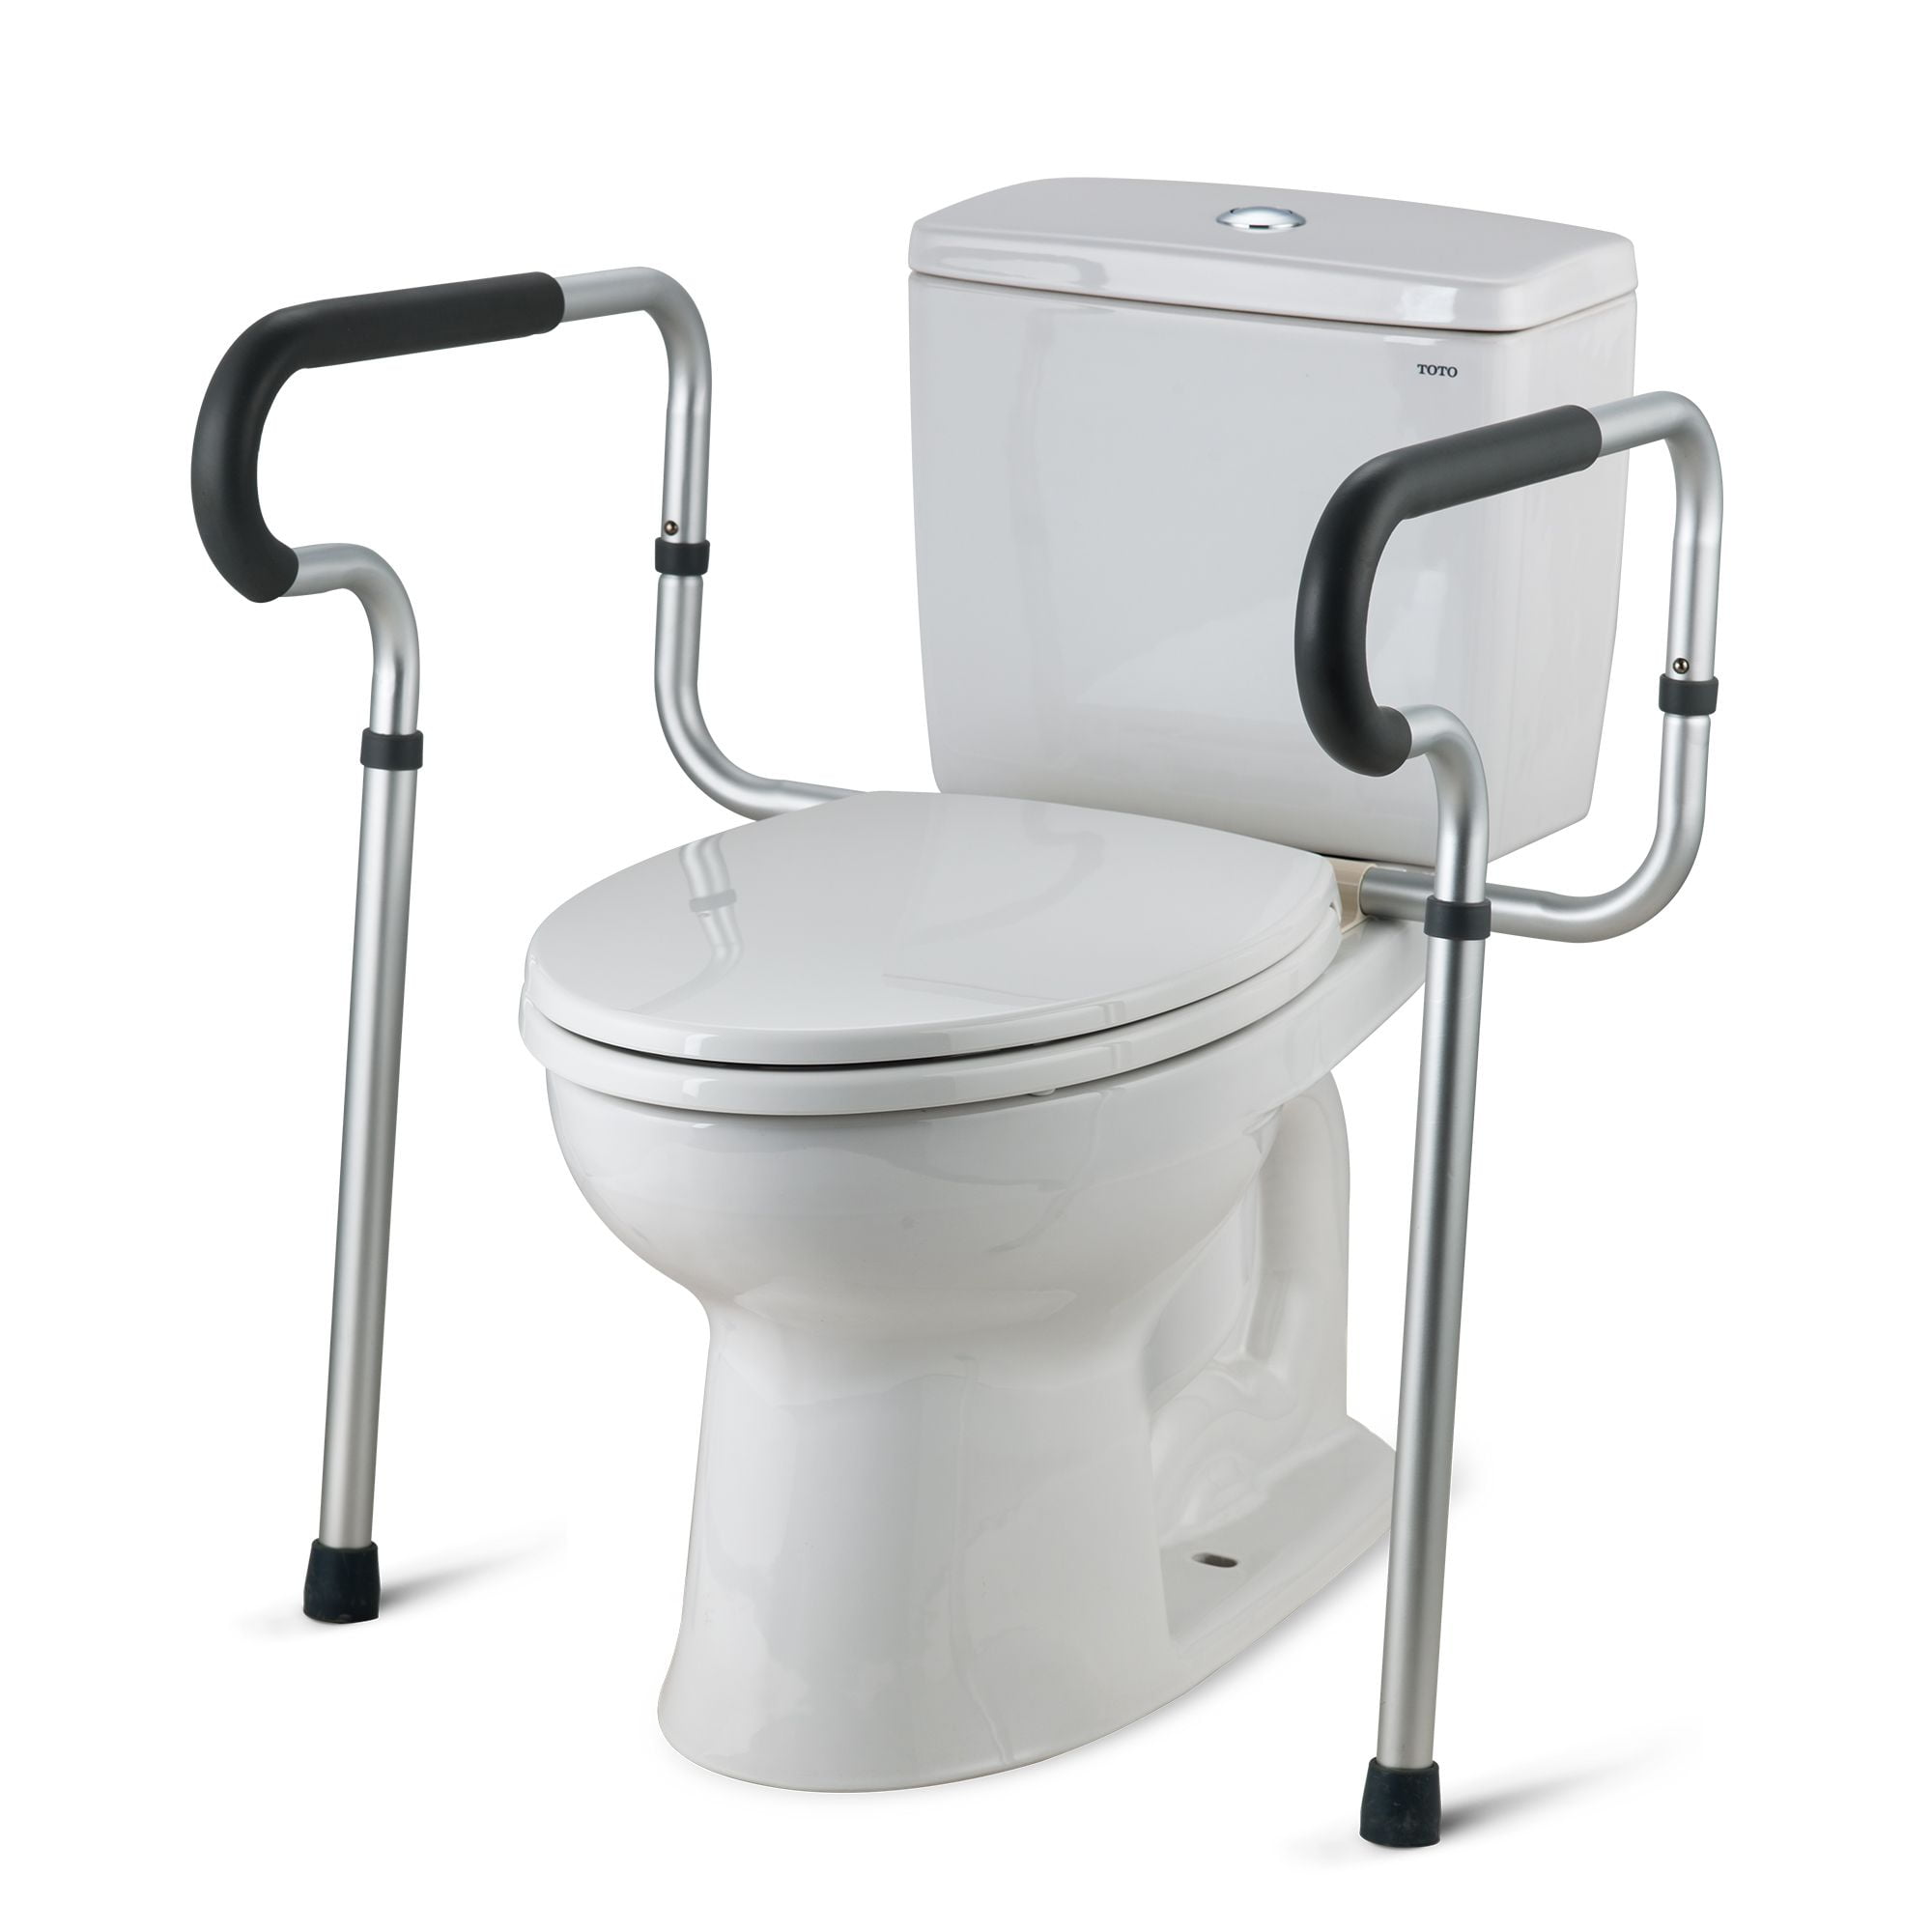 Toilet Safety Rail with Adjustable Height for Bathroom Safety Toilet Assist Safety Frame for Toilet Easy Installation Bathroom Toilet Handrail Grab Bar for Elderly Handicapped US Delivery